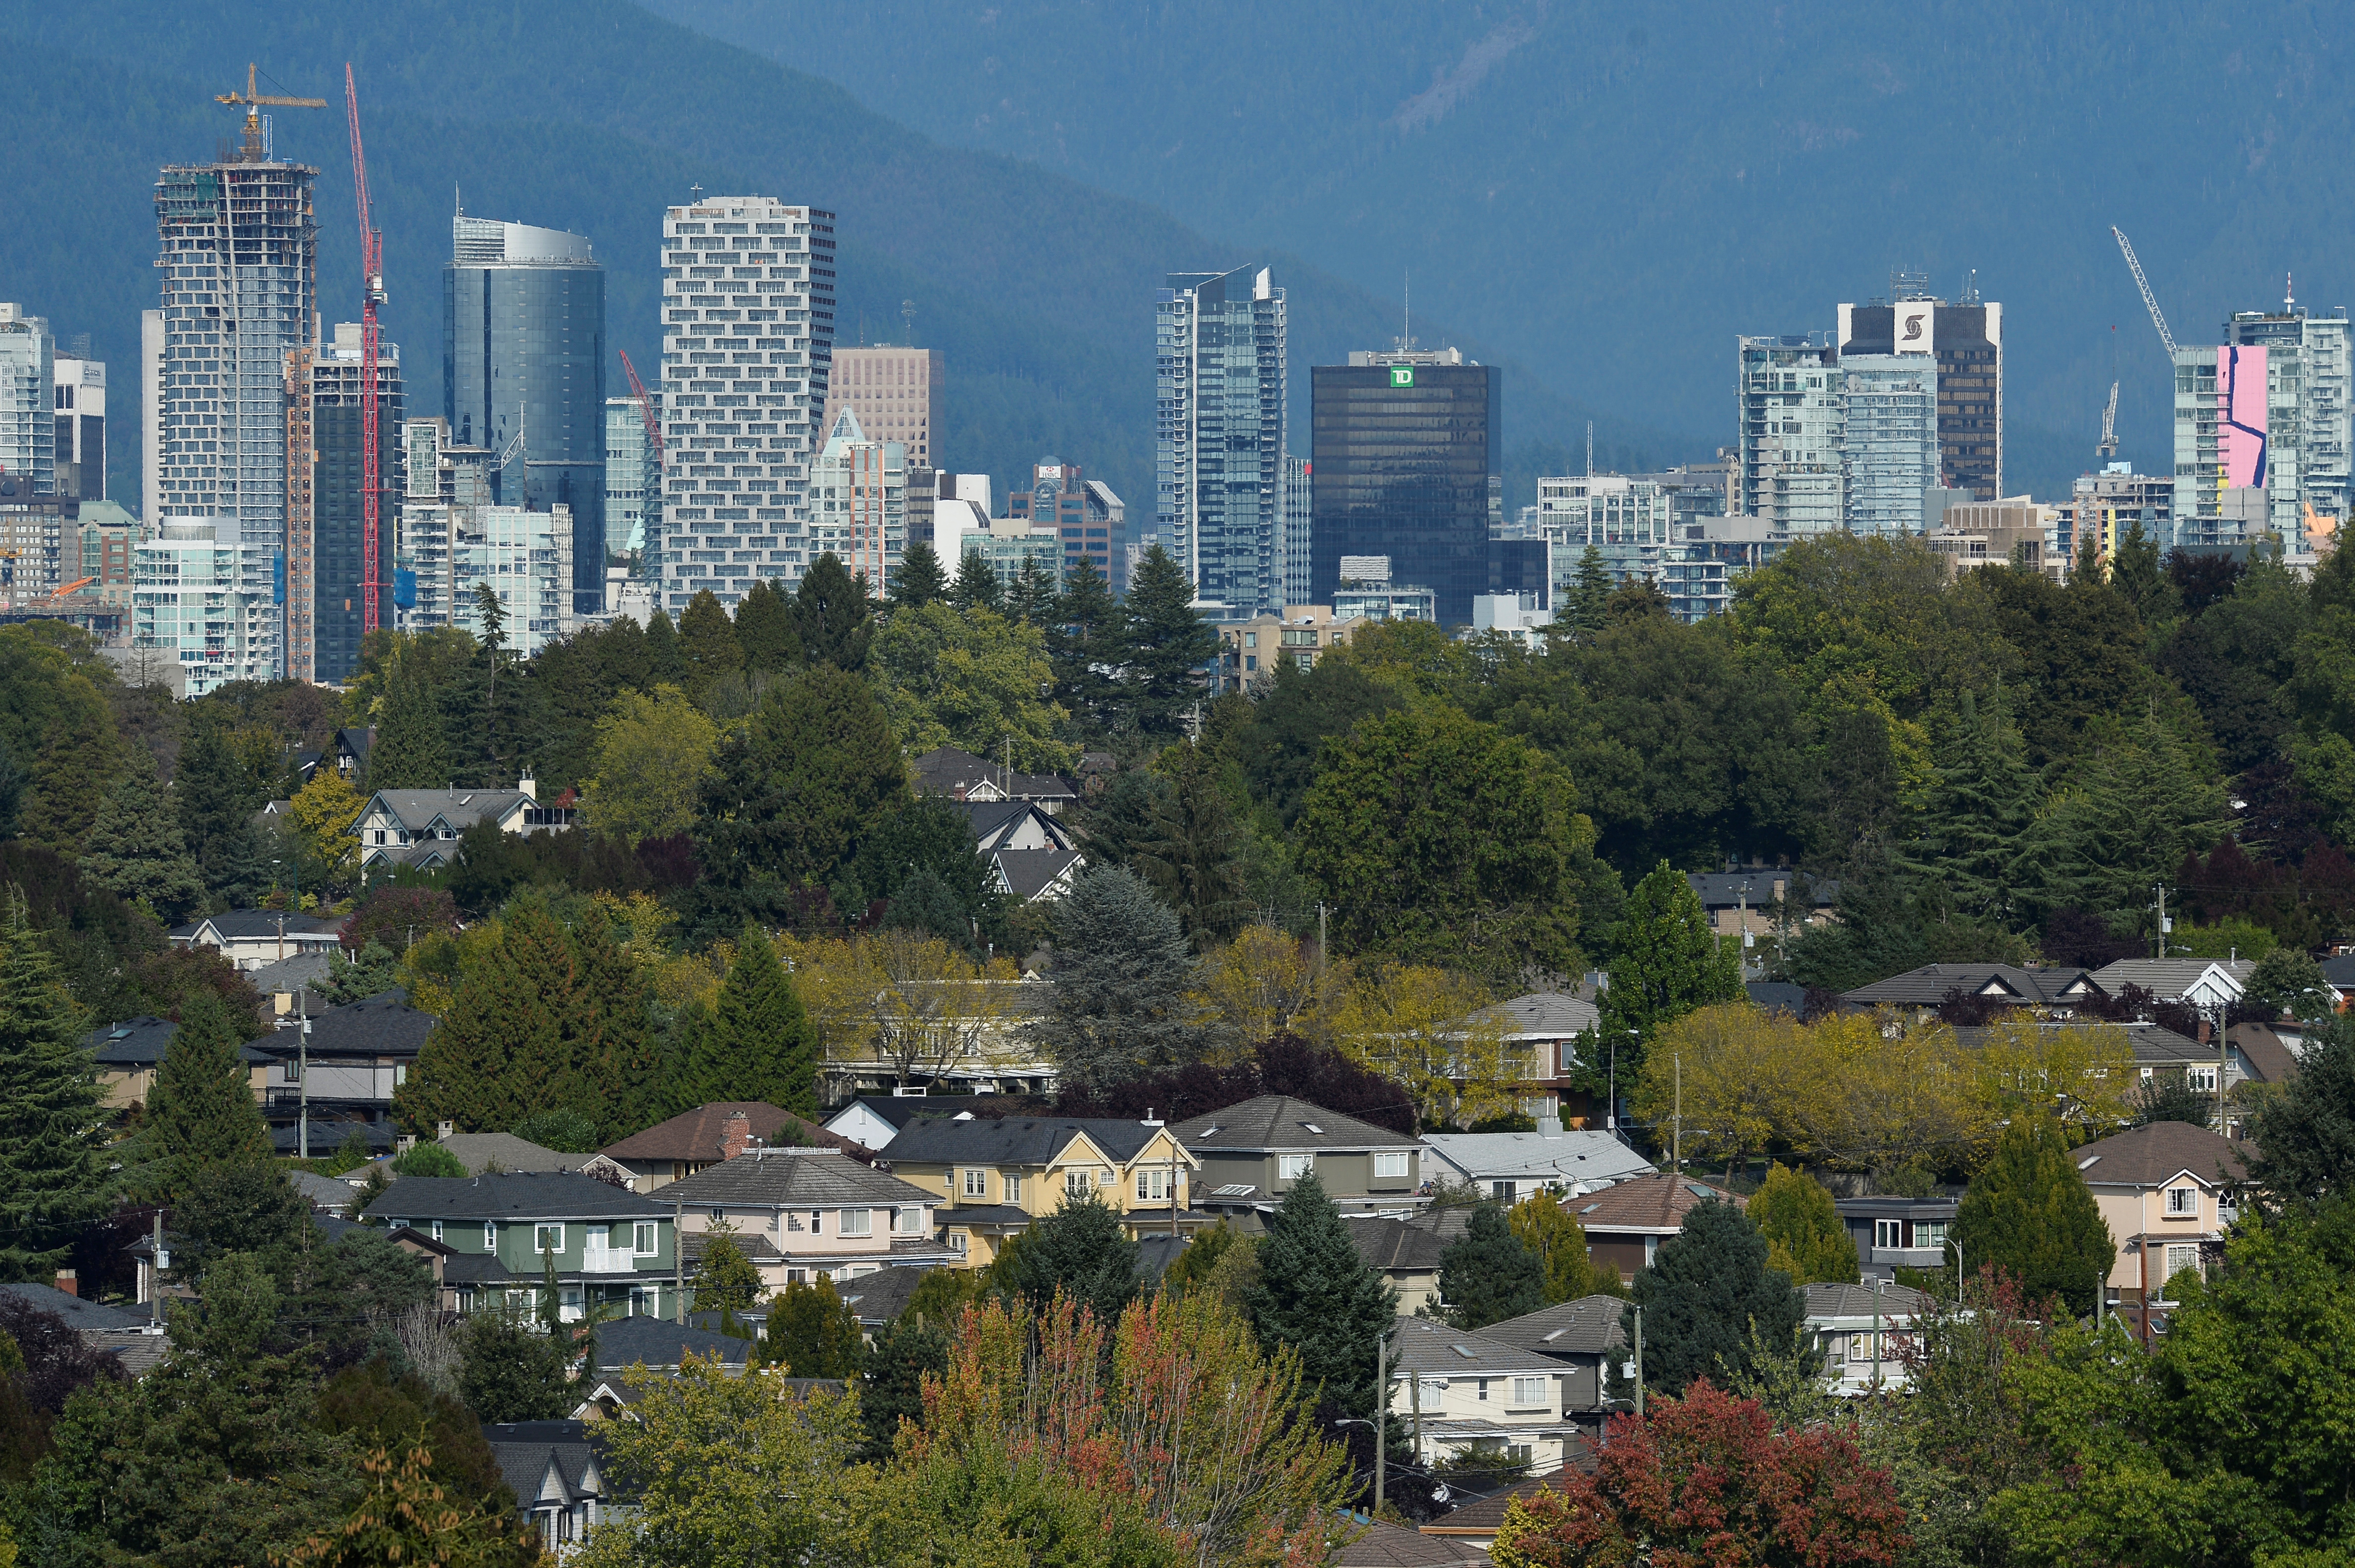 Single Family homes are seen in Vancouver